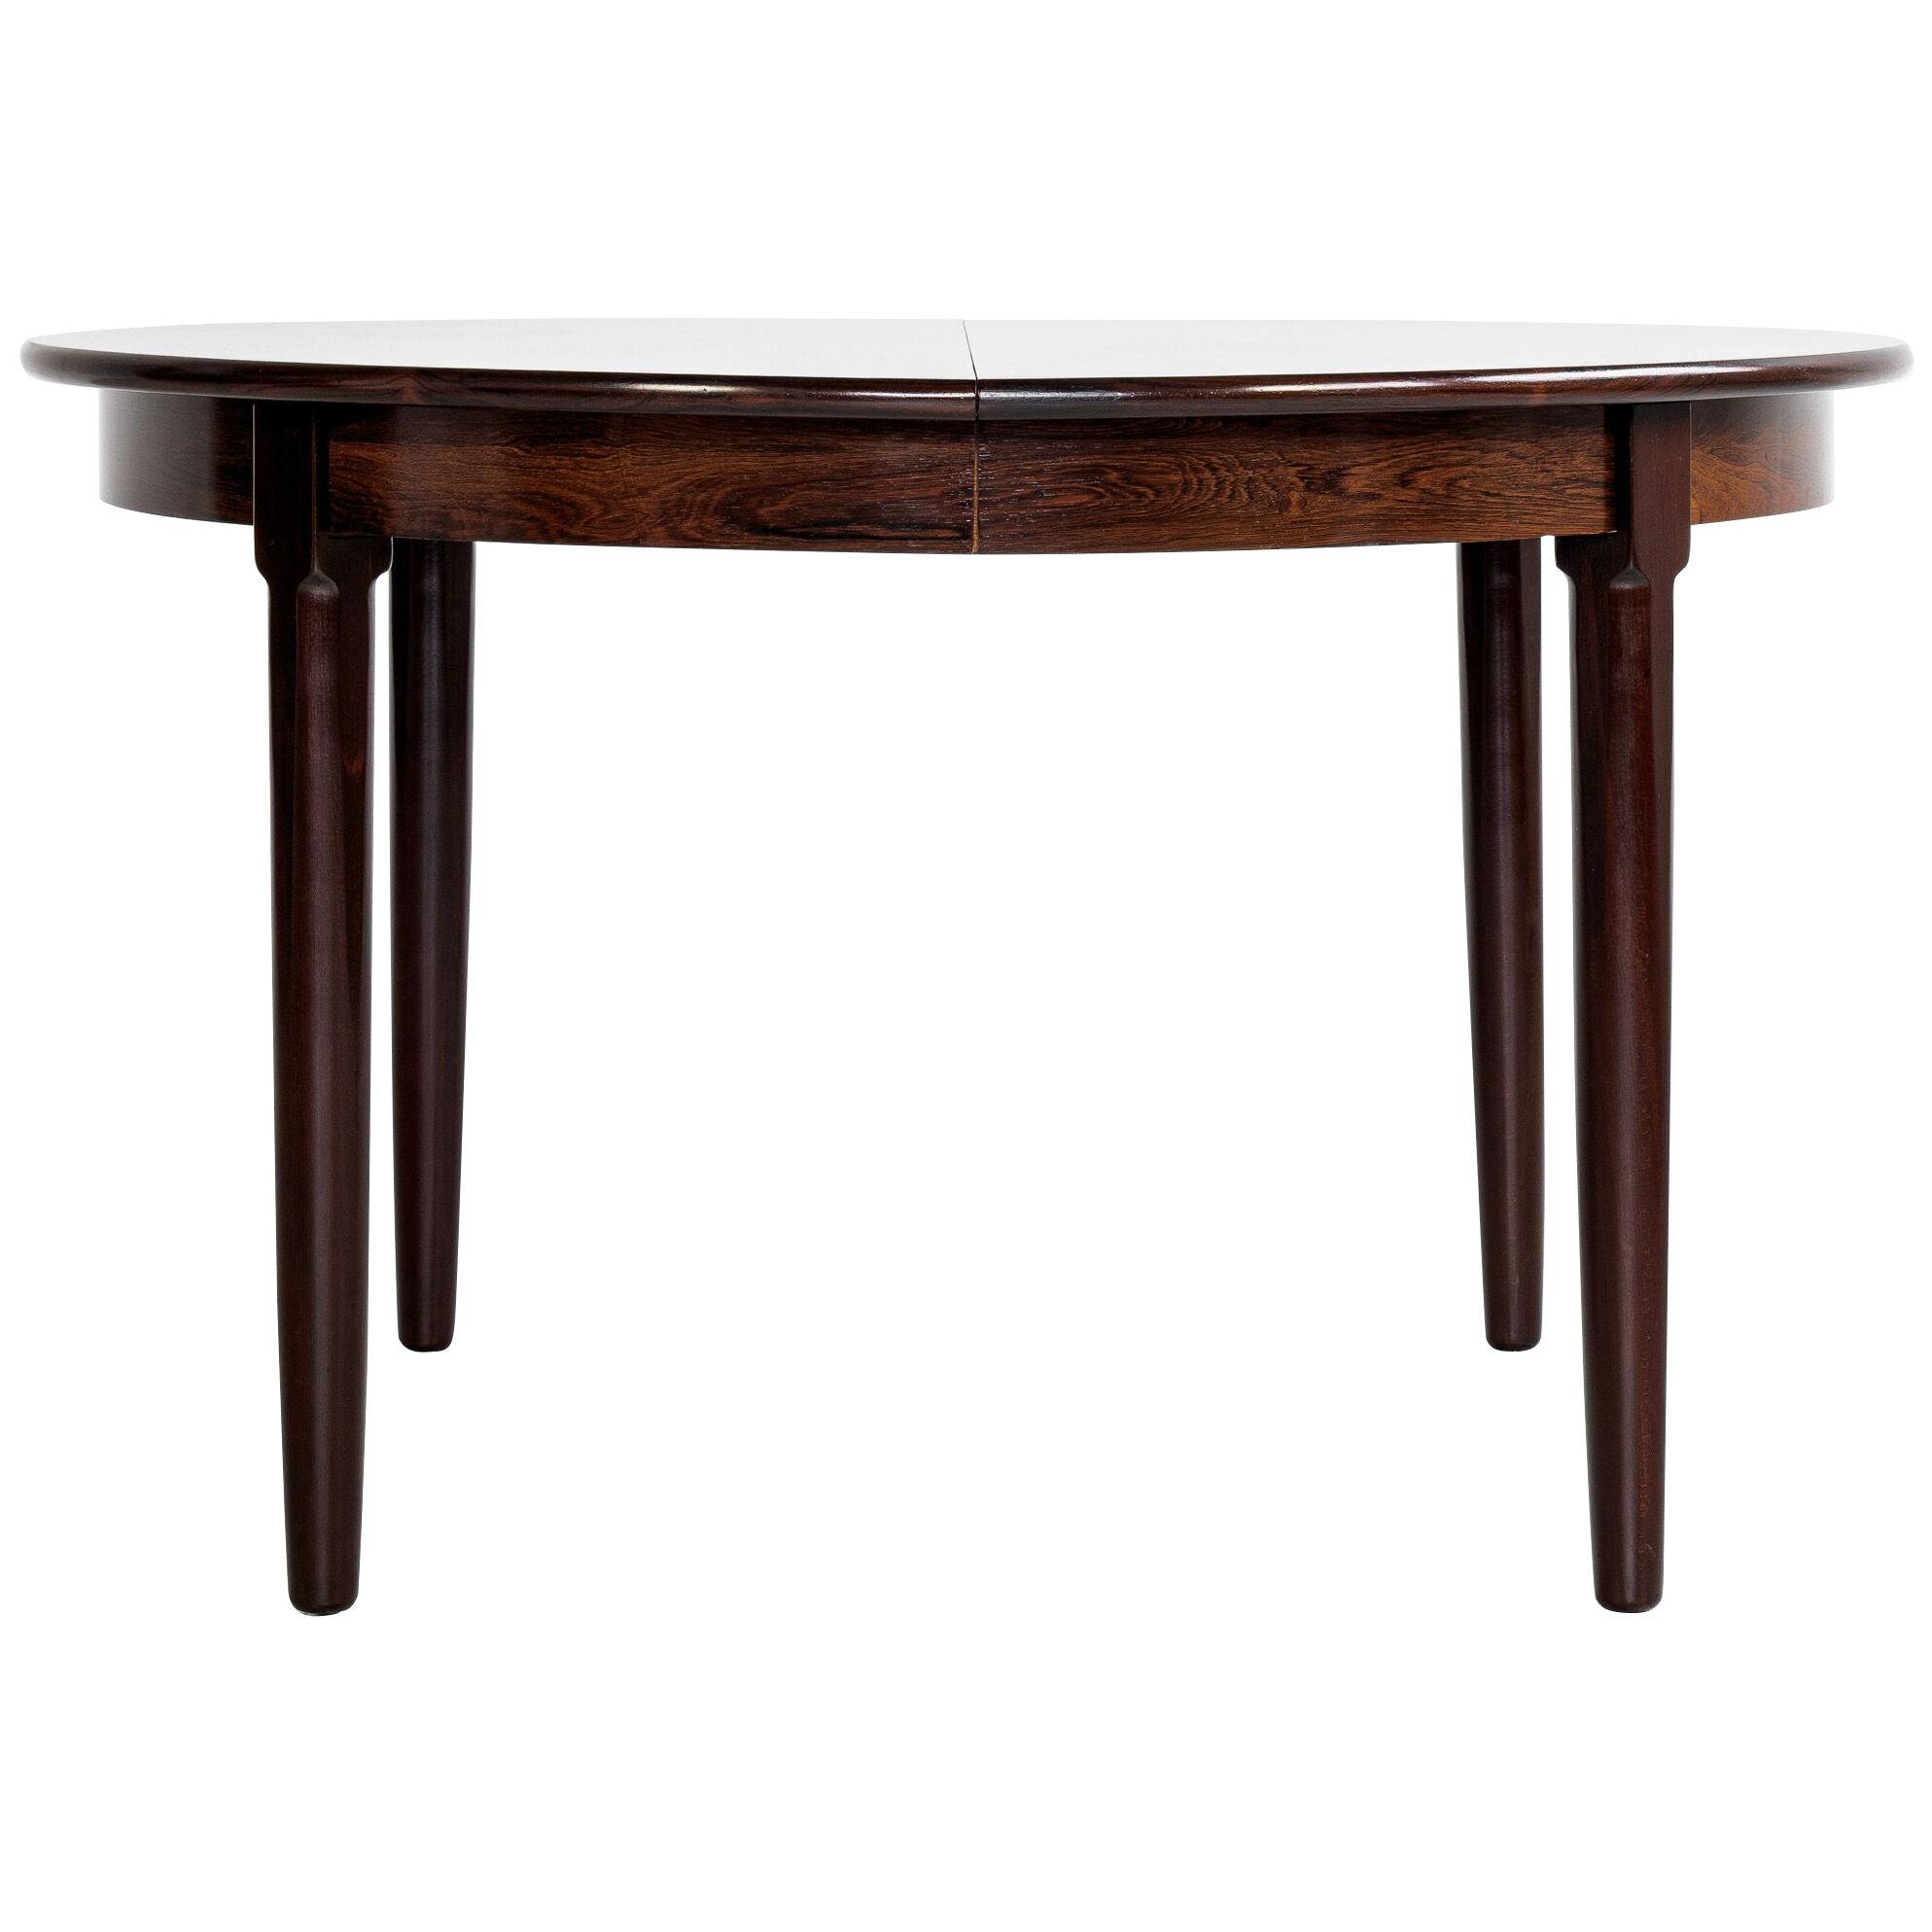 Midcentury Danish round dining table in rosewood 1960s with 4 legs